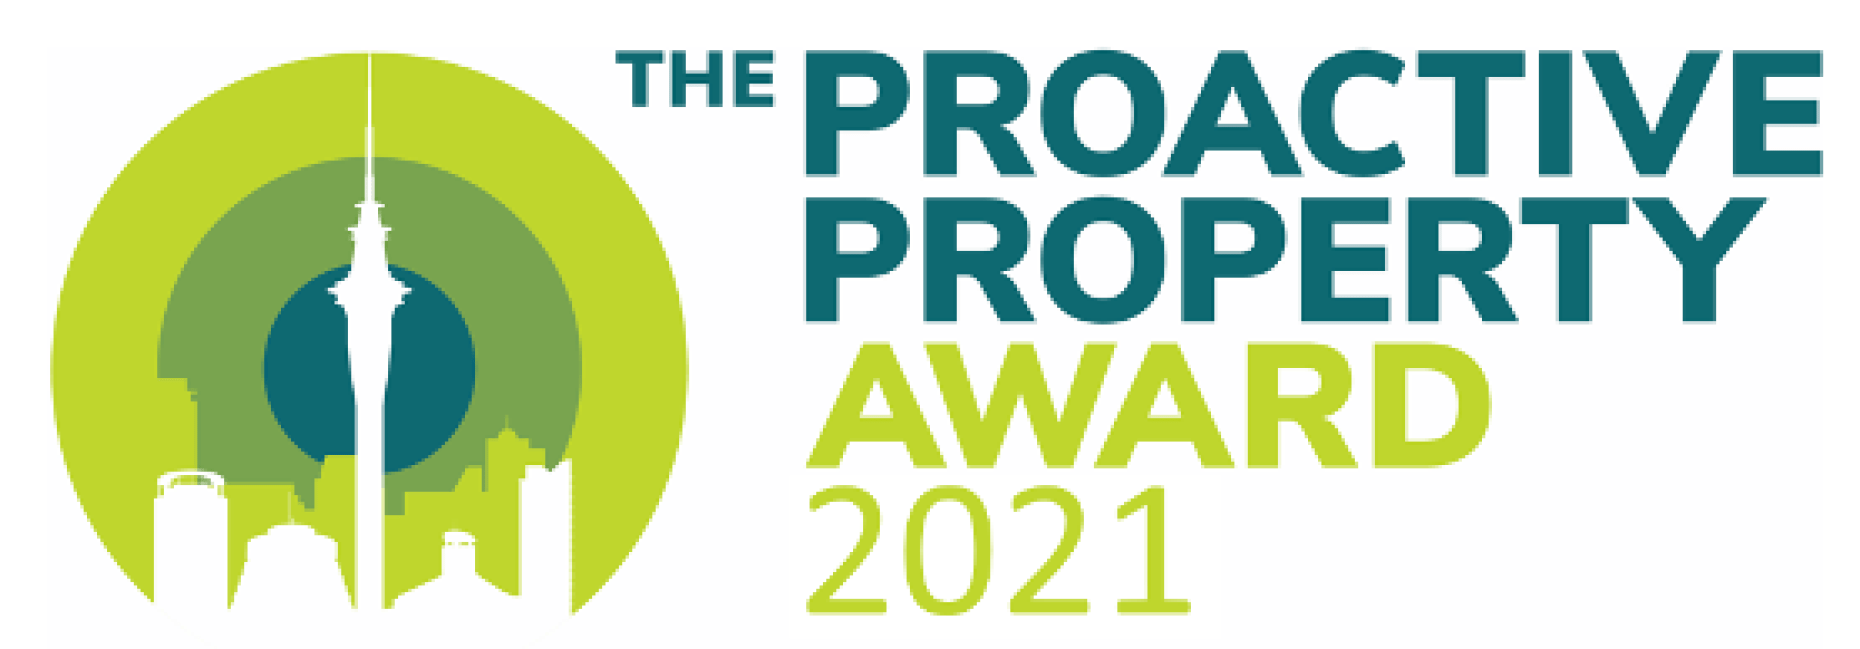 Young property leaders: enter CoreNet’s Proactive Property Awards 2021!